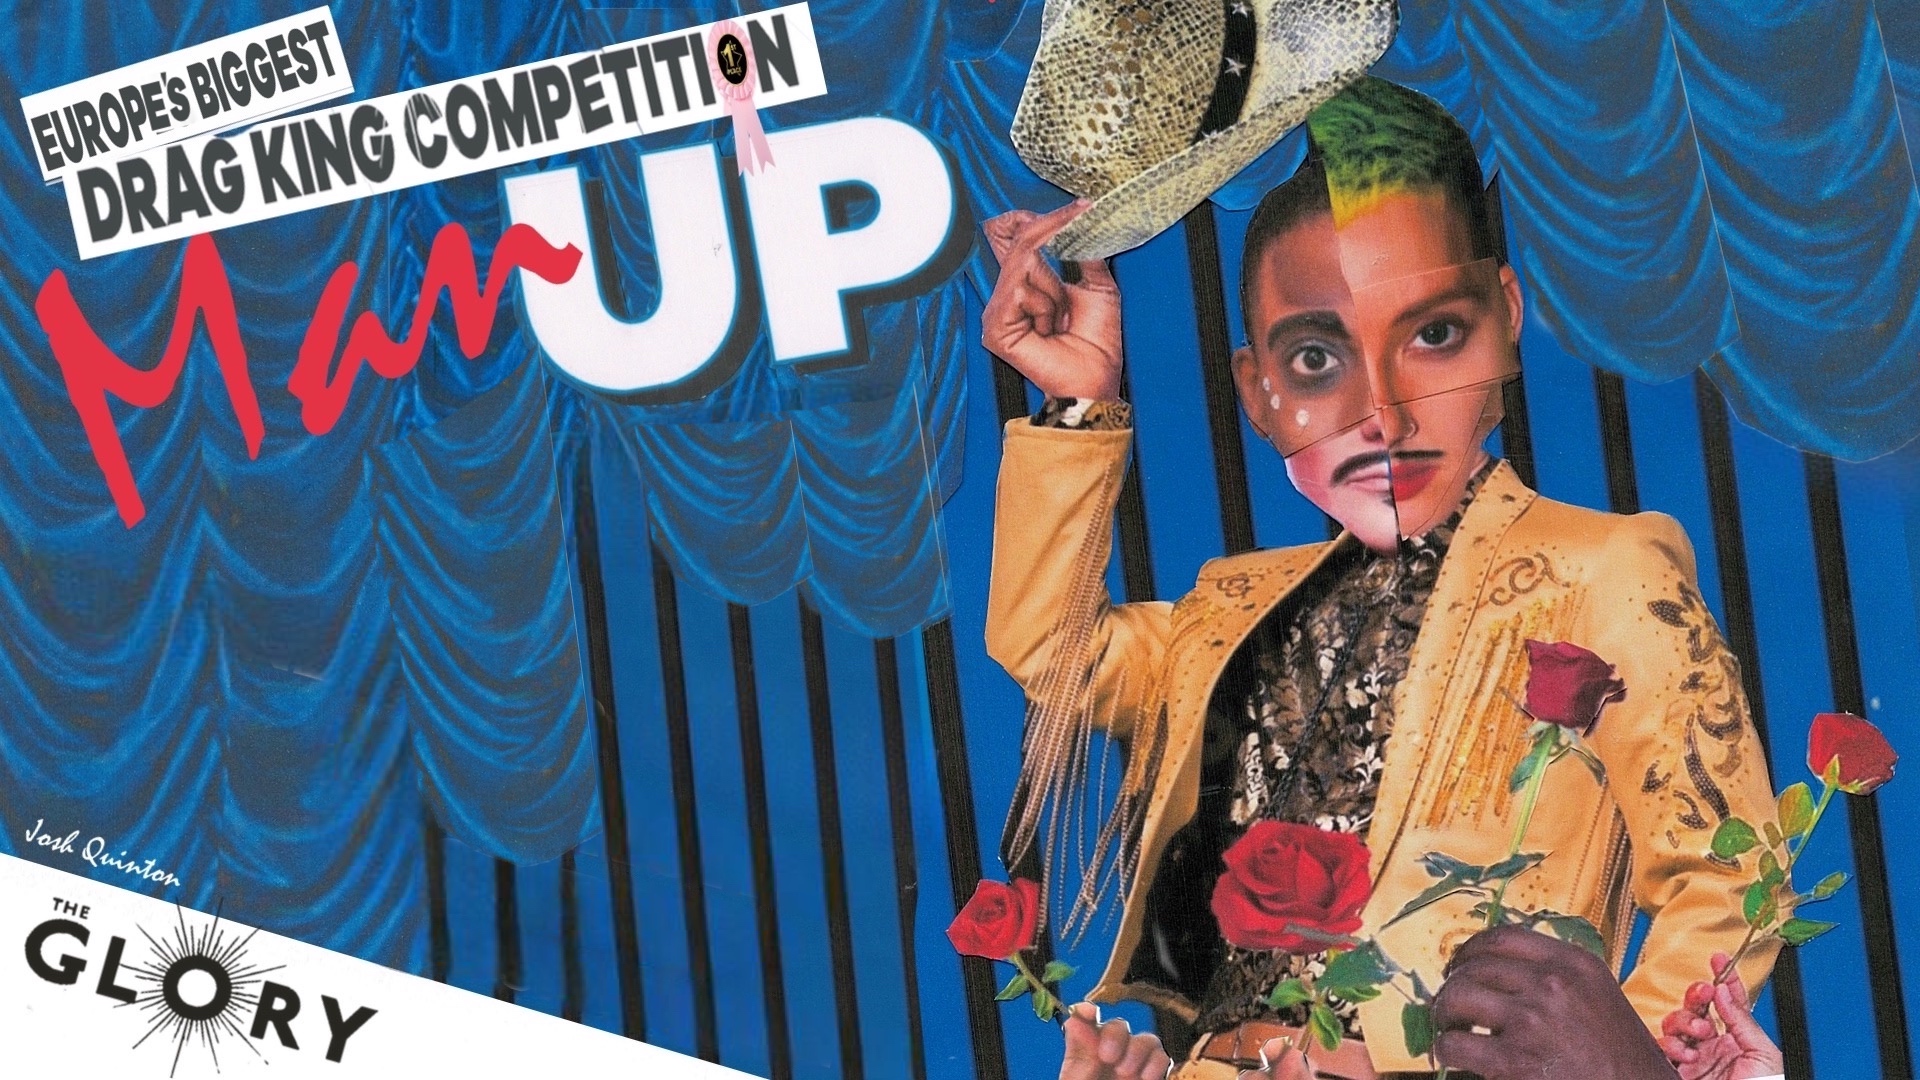 Man Up! Drag King Competition – HEAT 1